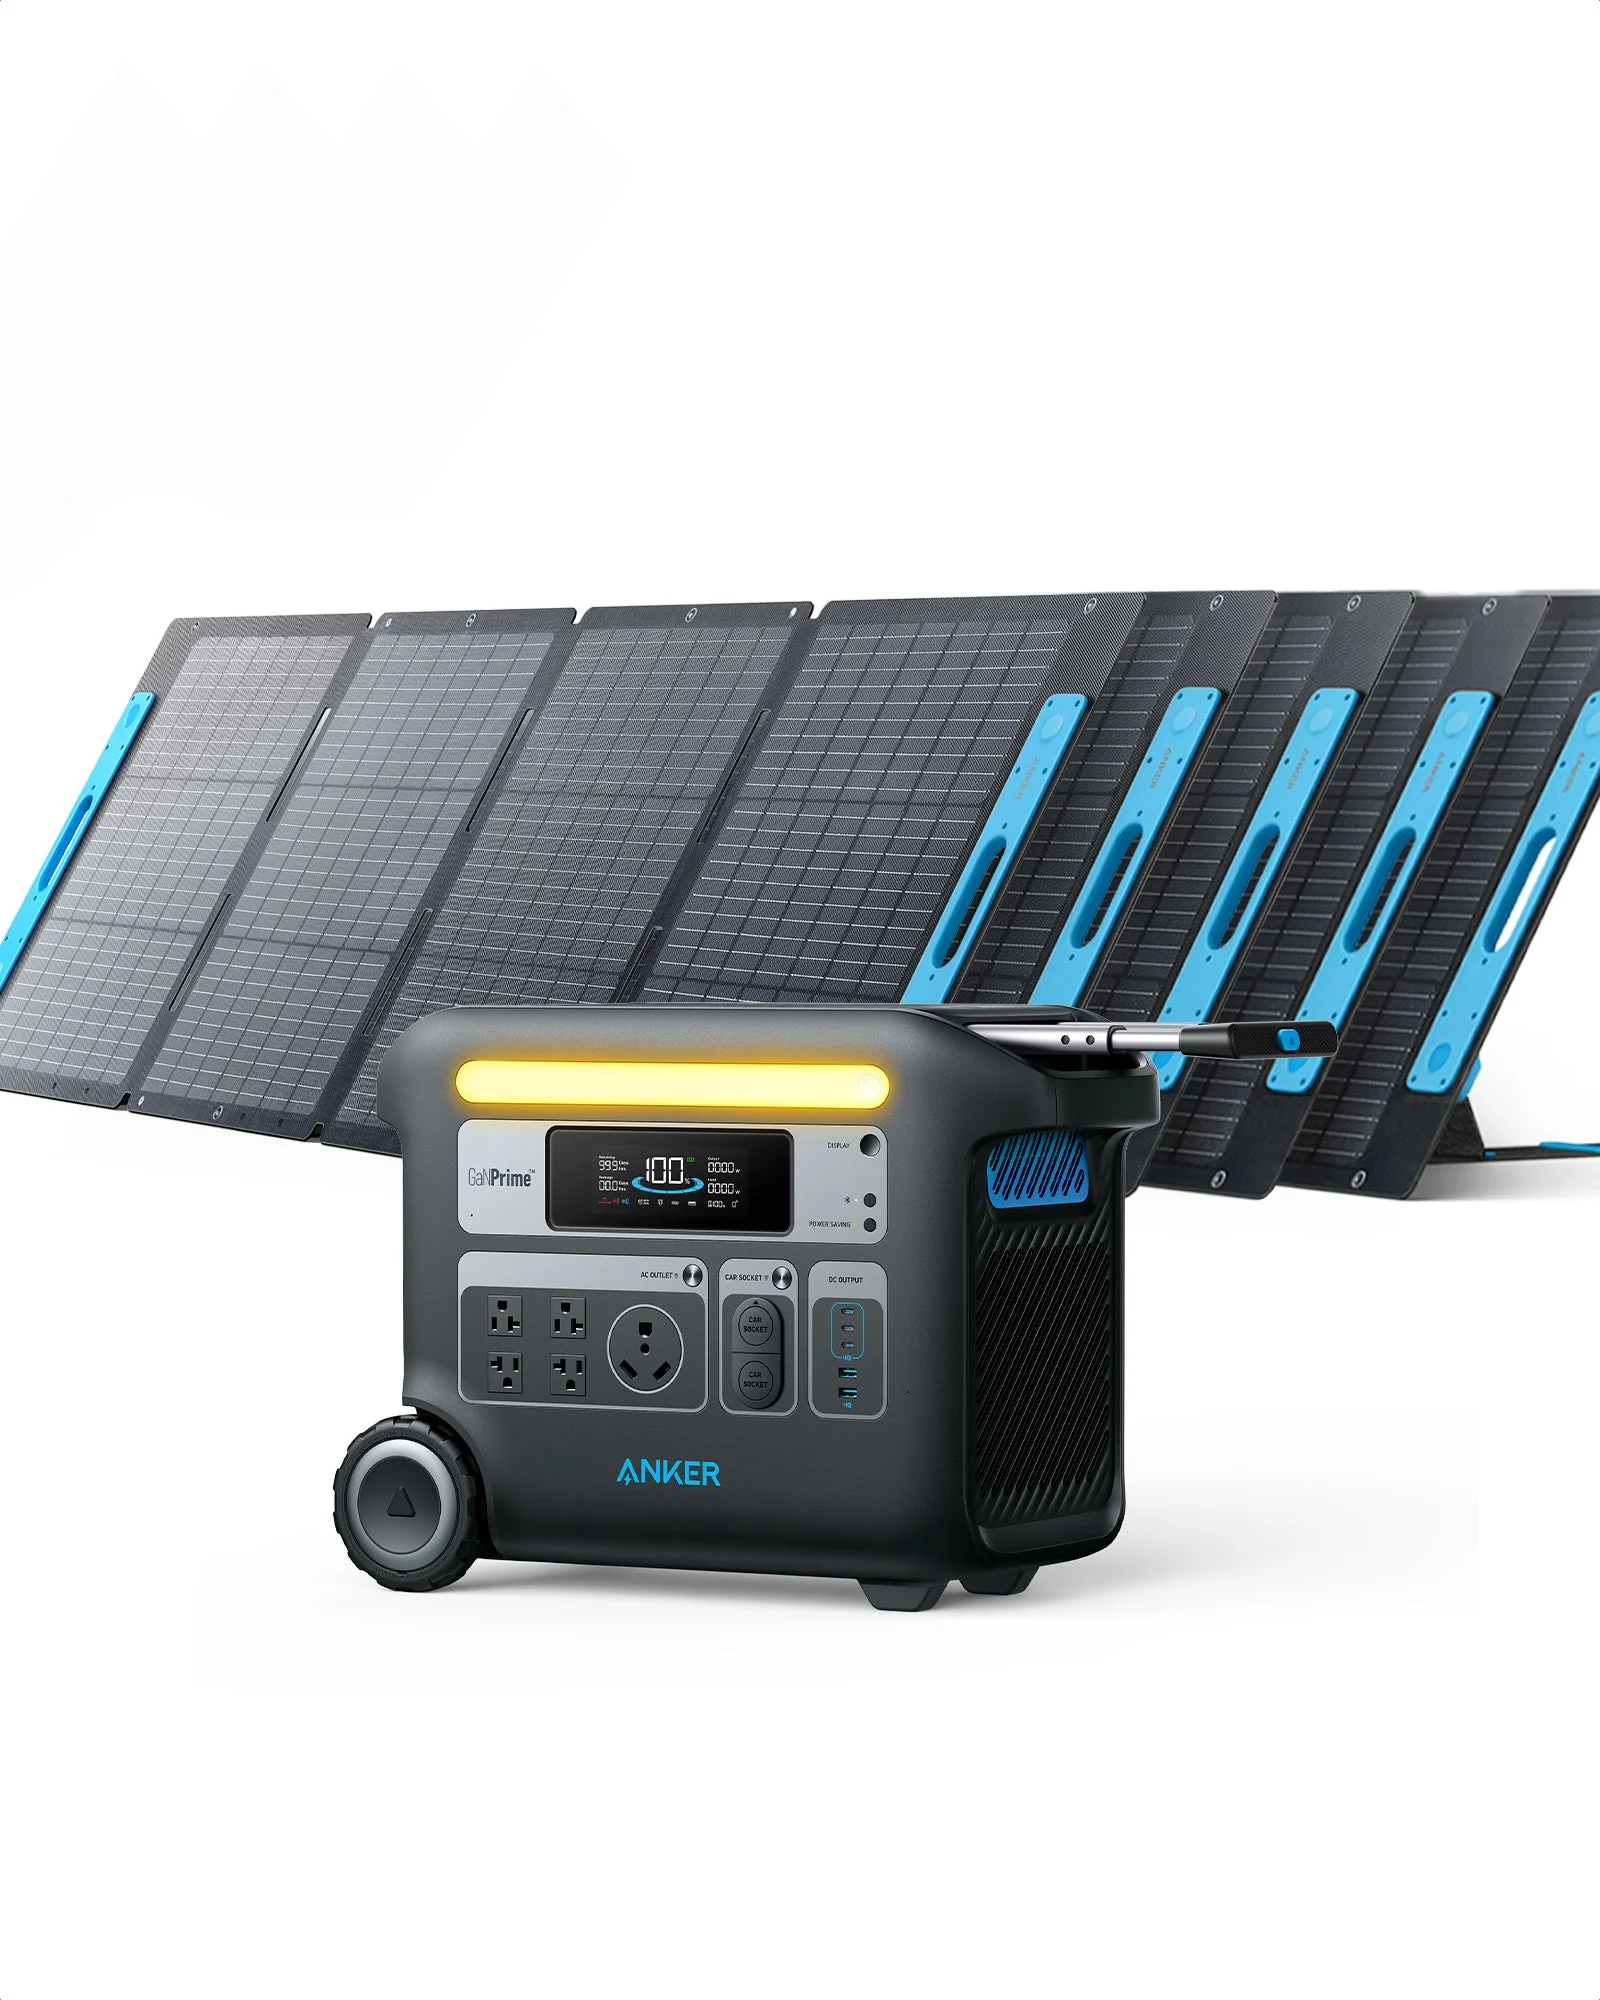 A portable solar power system with a battery and charger for emergency food storage.